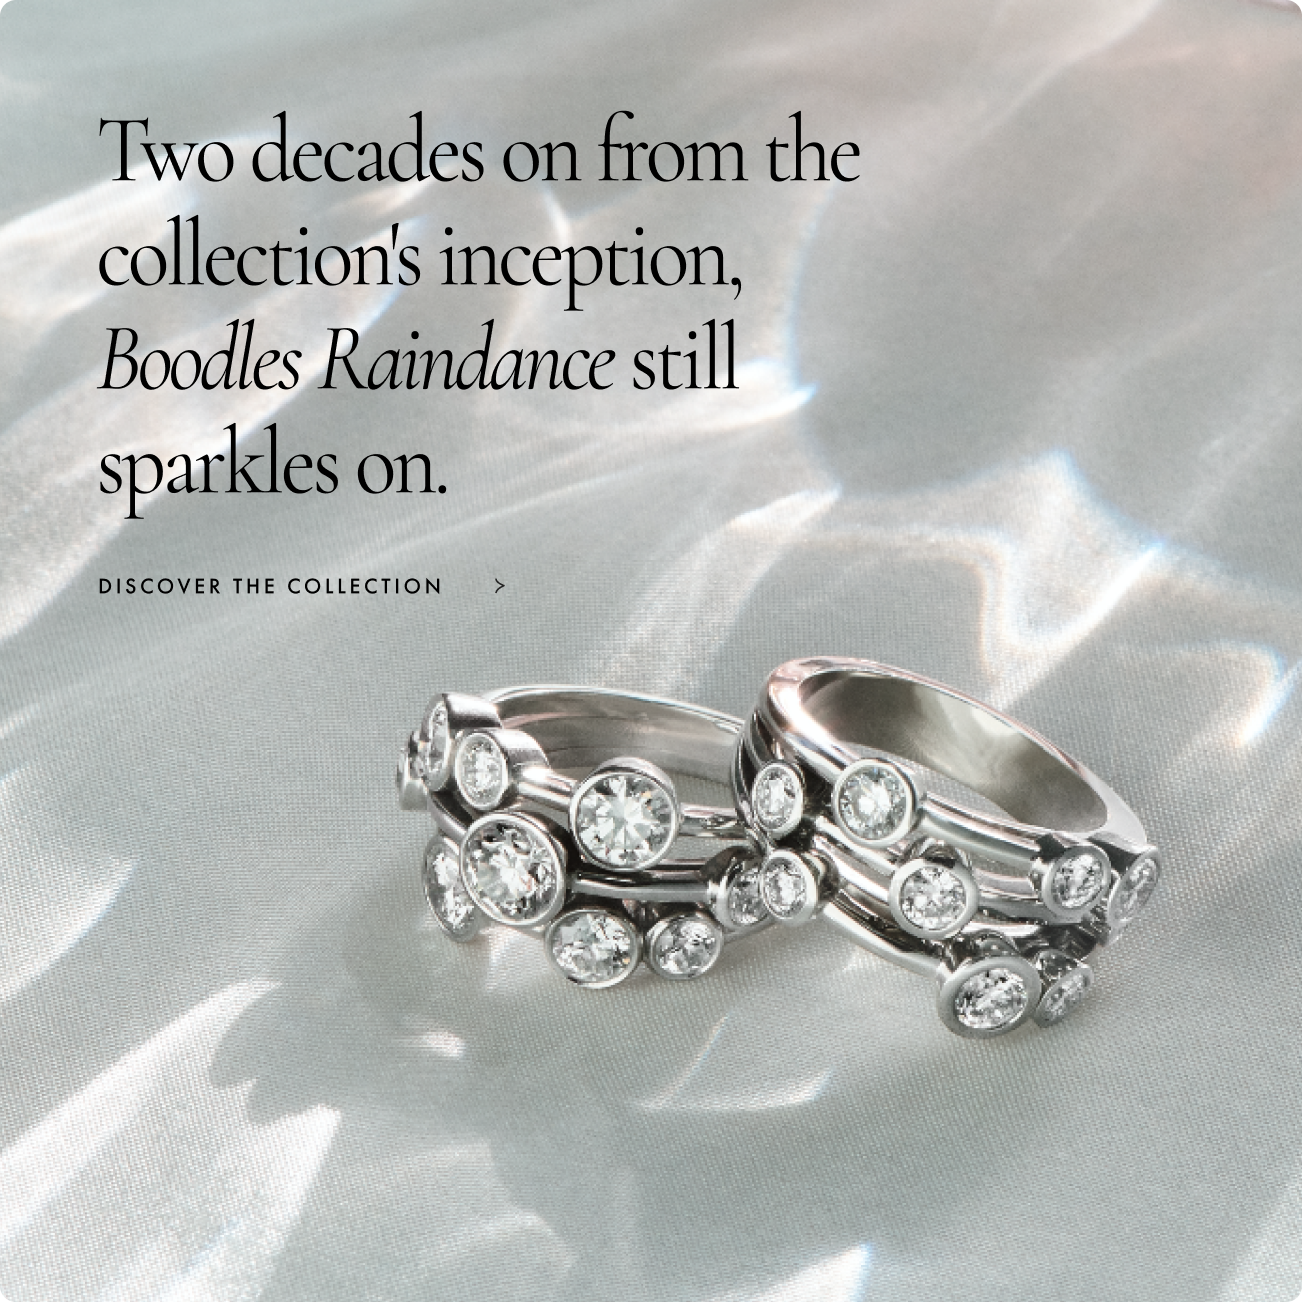 Boodles campaign with collection detail copy overlaid